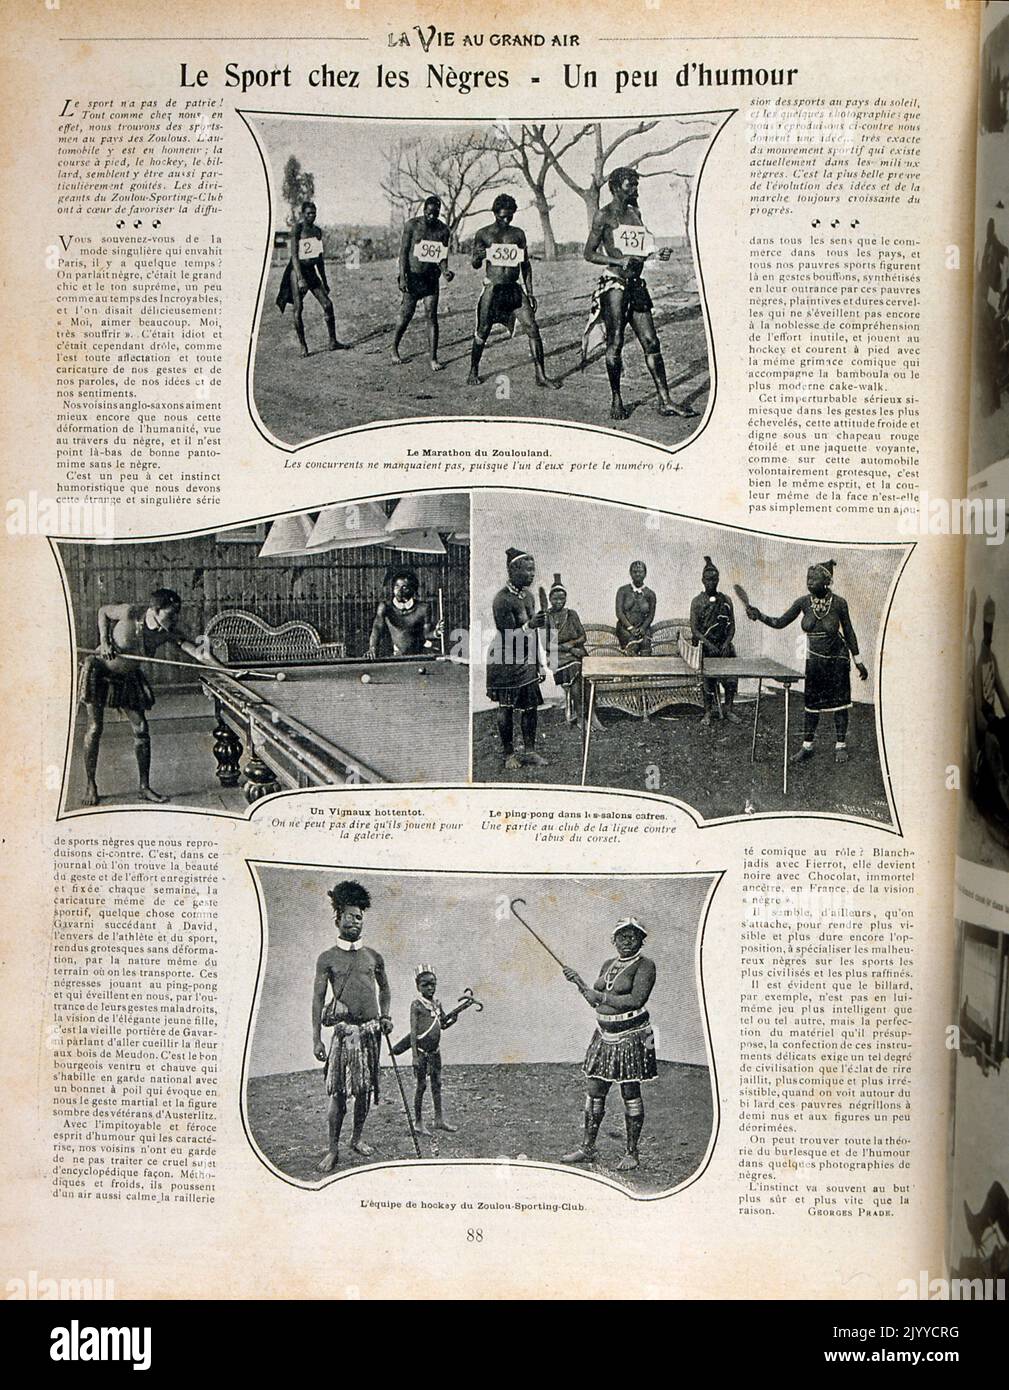 From the magazine La Vie au Grand Air (Life in the Outdoors); Black and white photographs of Africans participating in Western sports, including the marathon, snooker, table tennis and hockey. Entitled 'Sports for black people (a little bit of humour)' - ethnocentric/racist. Stock Photo